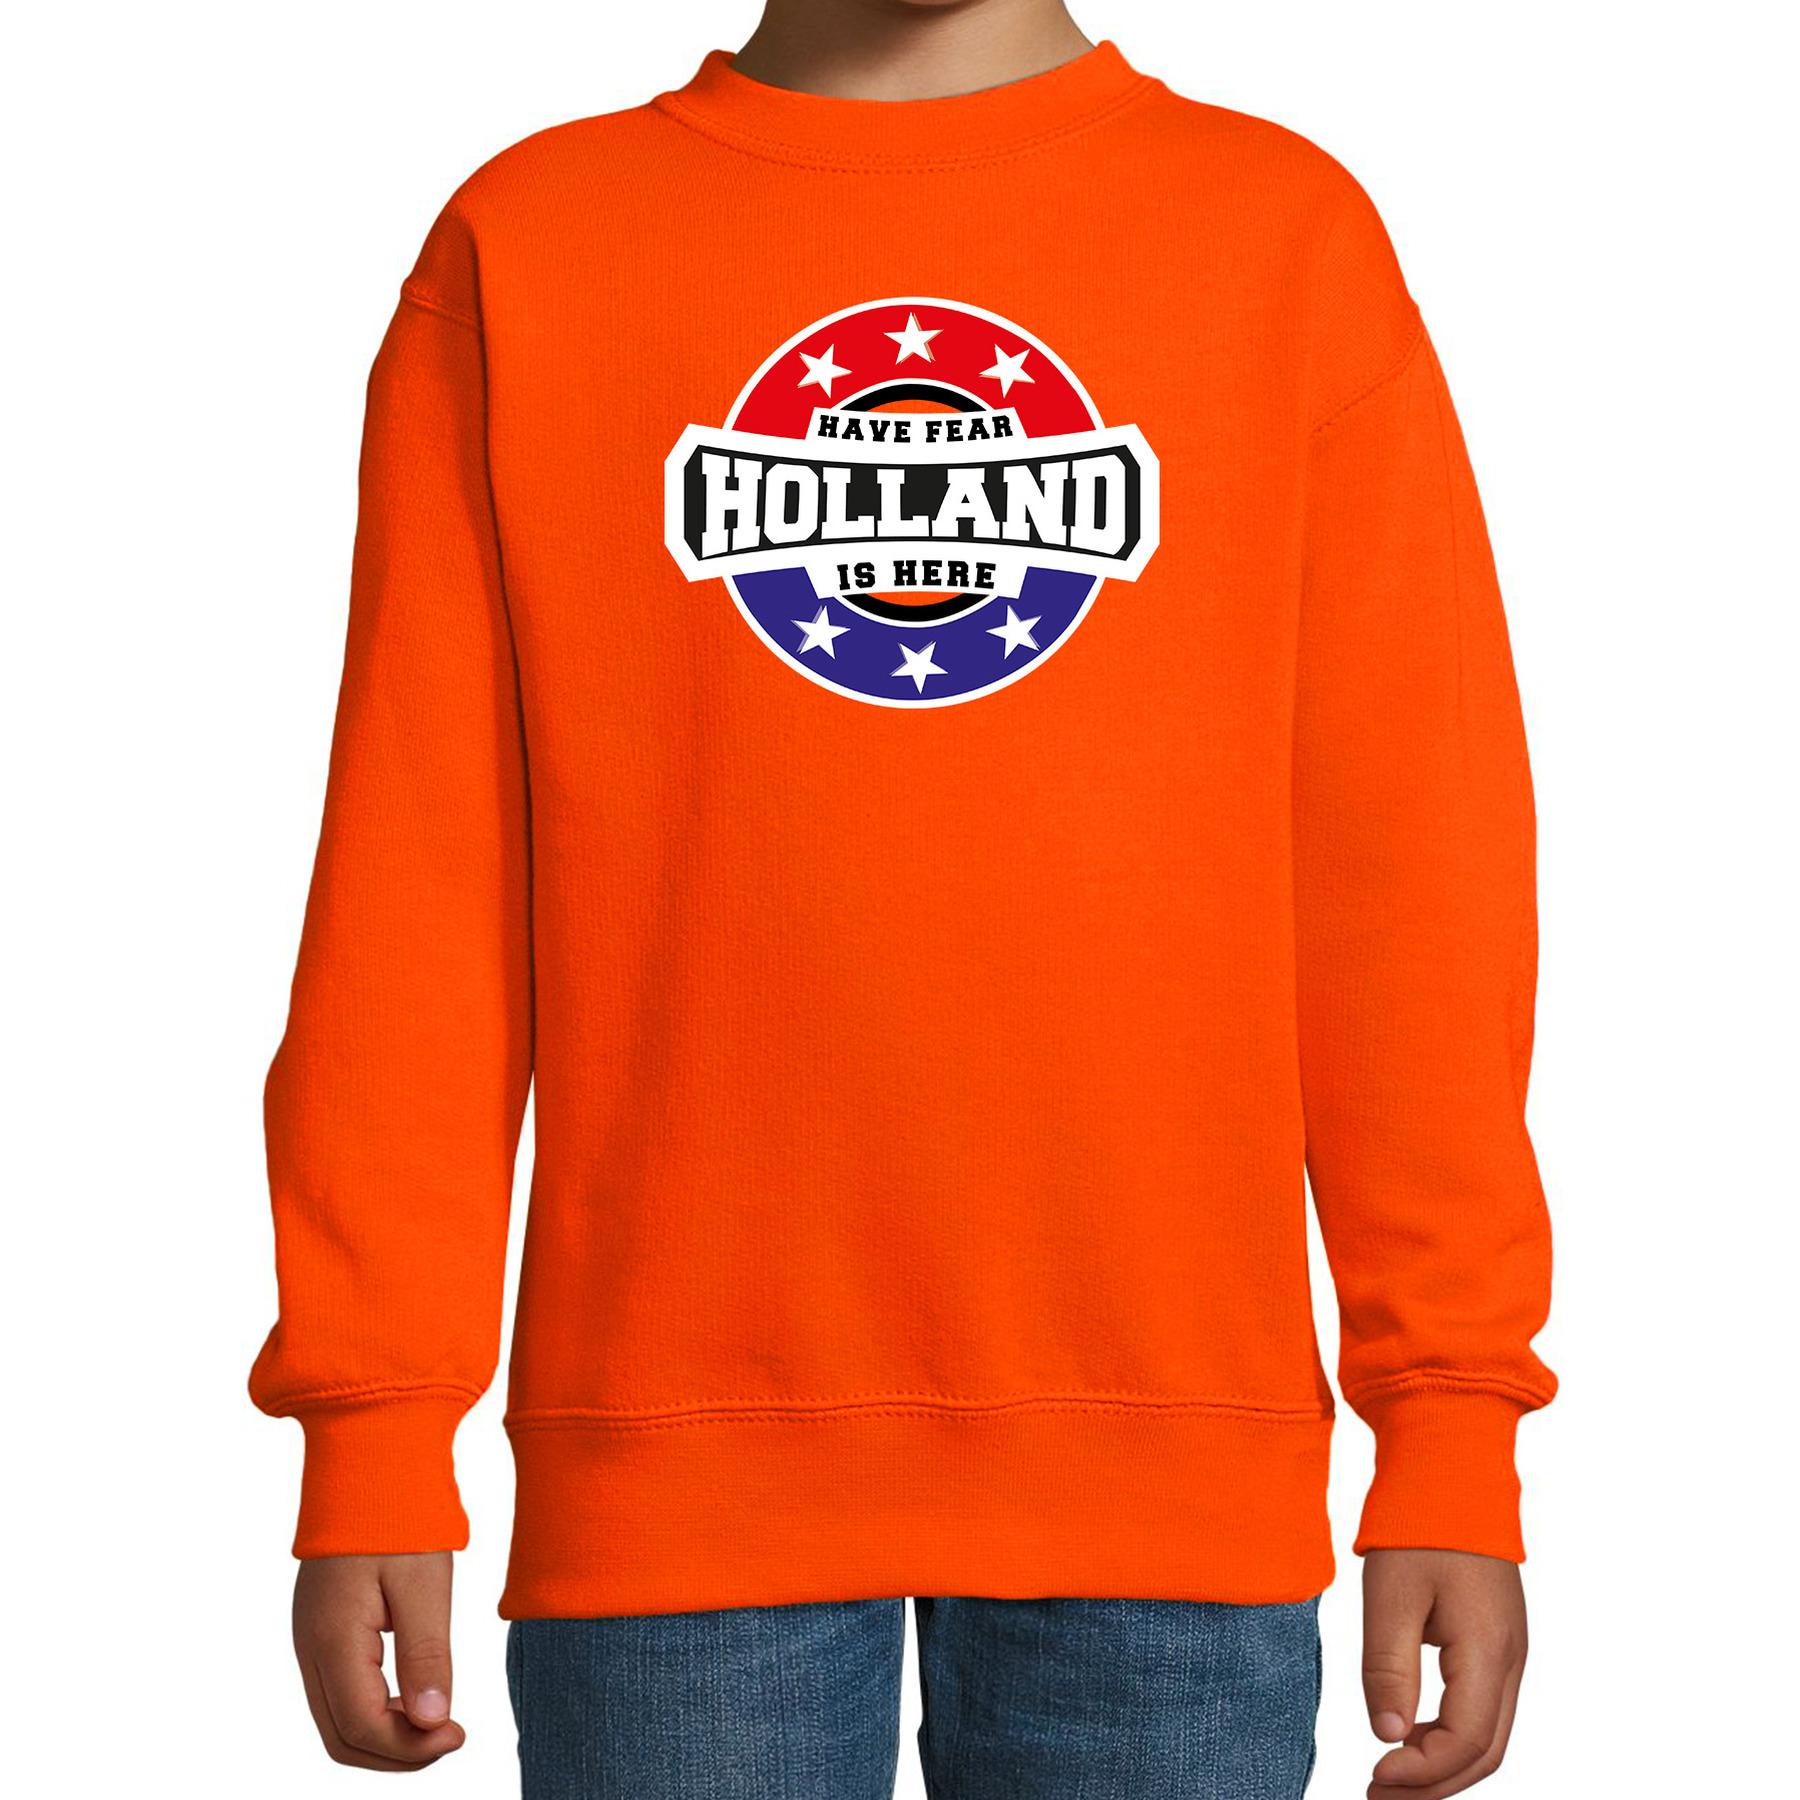 Have fear Holland is here-Holland supporter sweater oranje voor kids